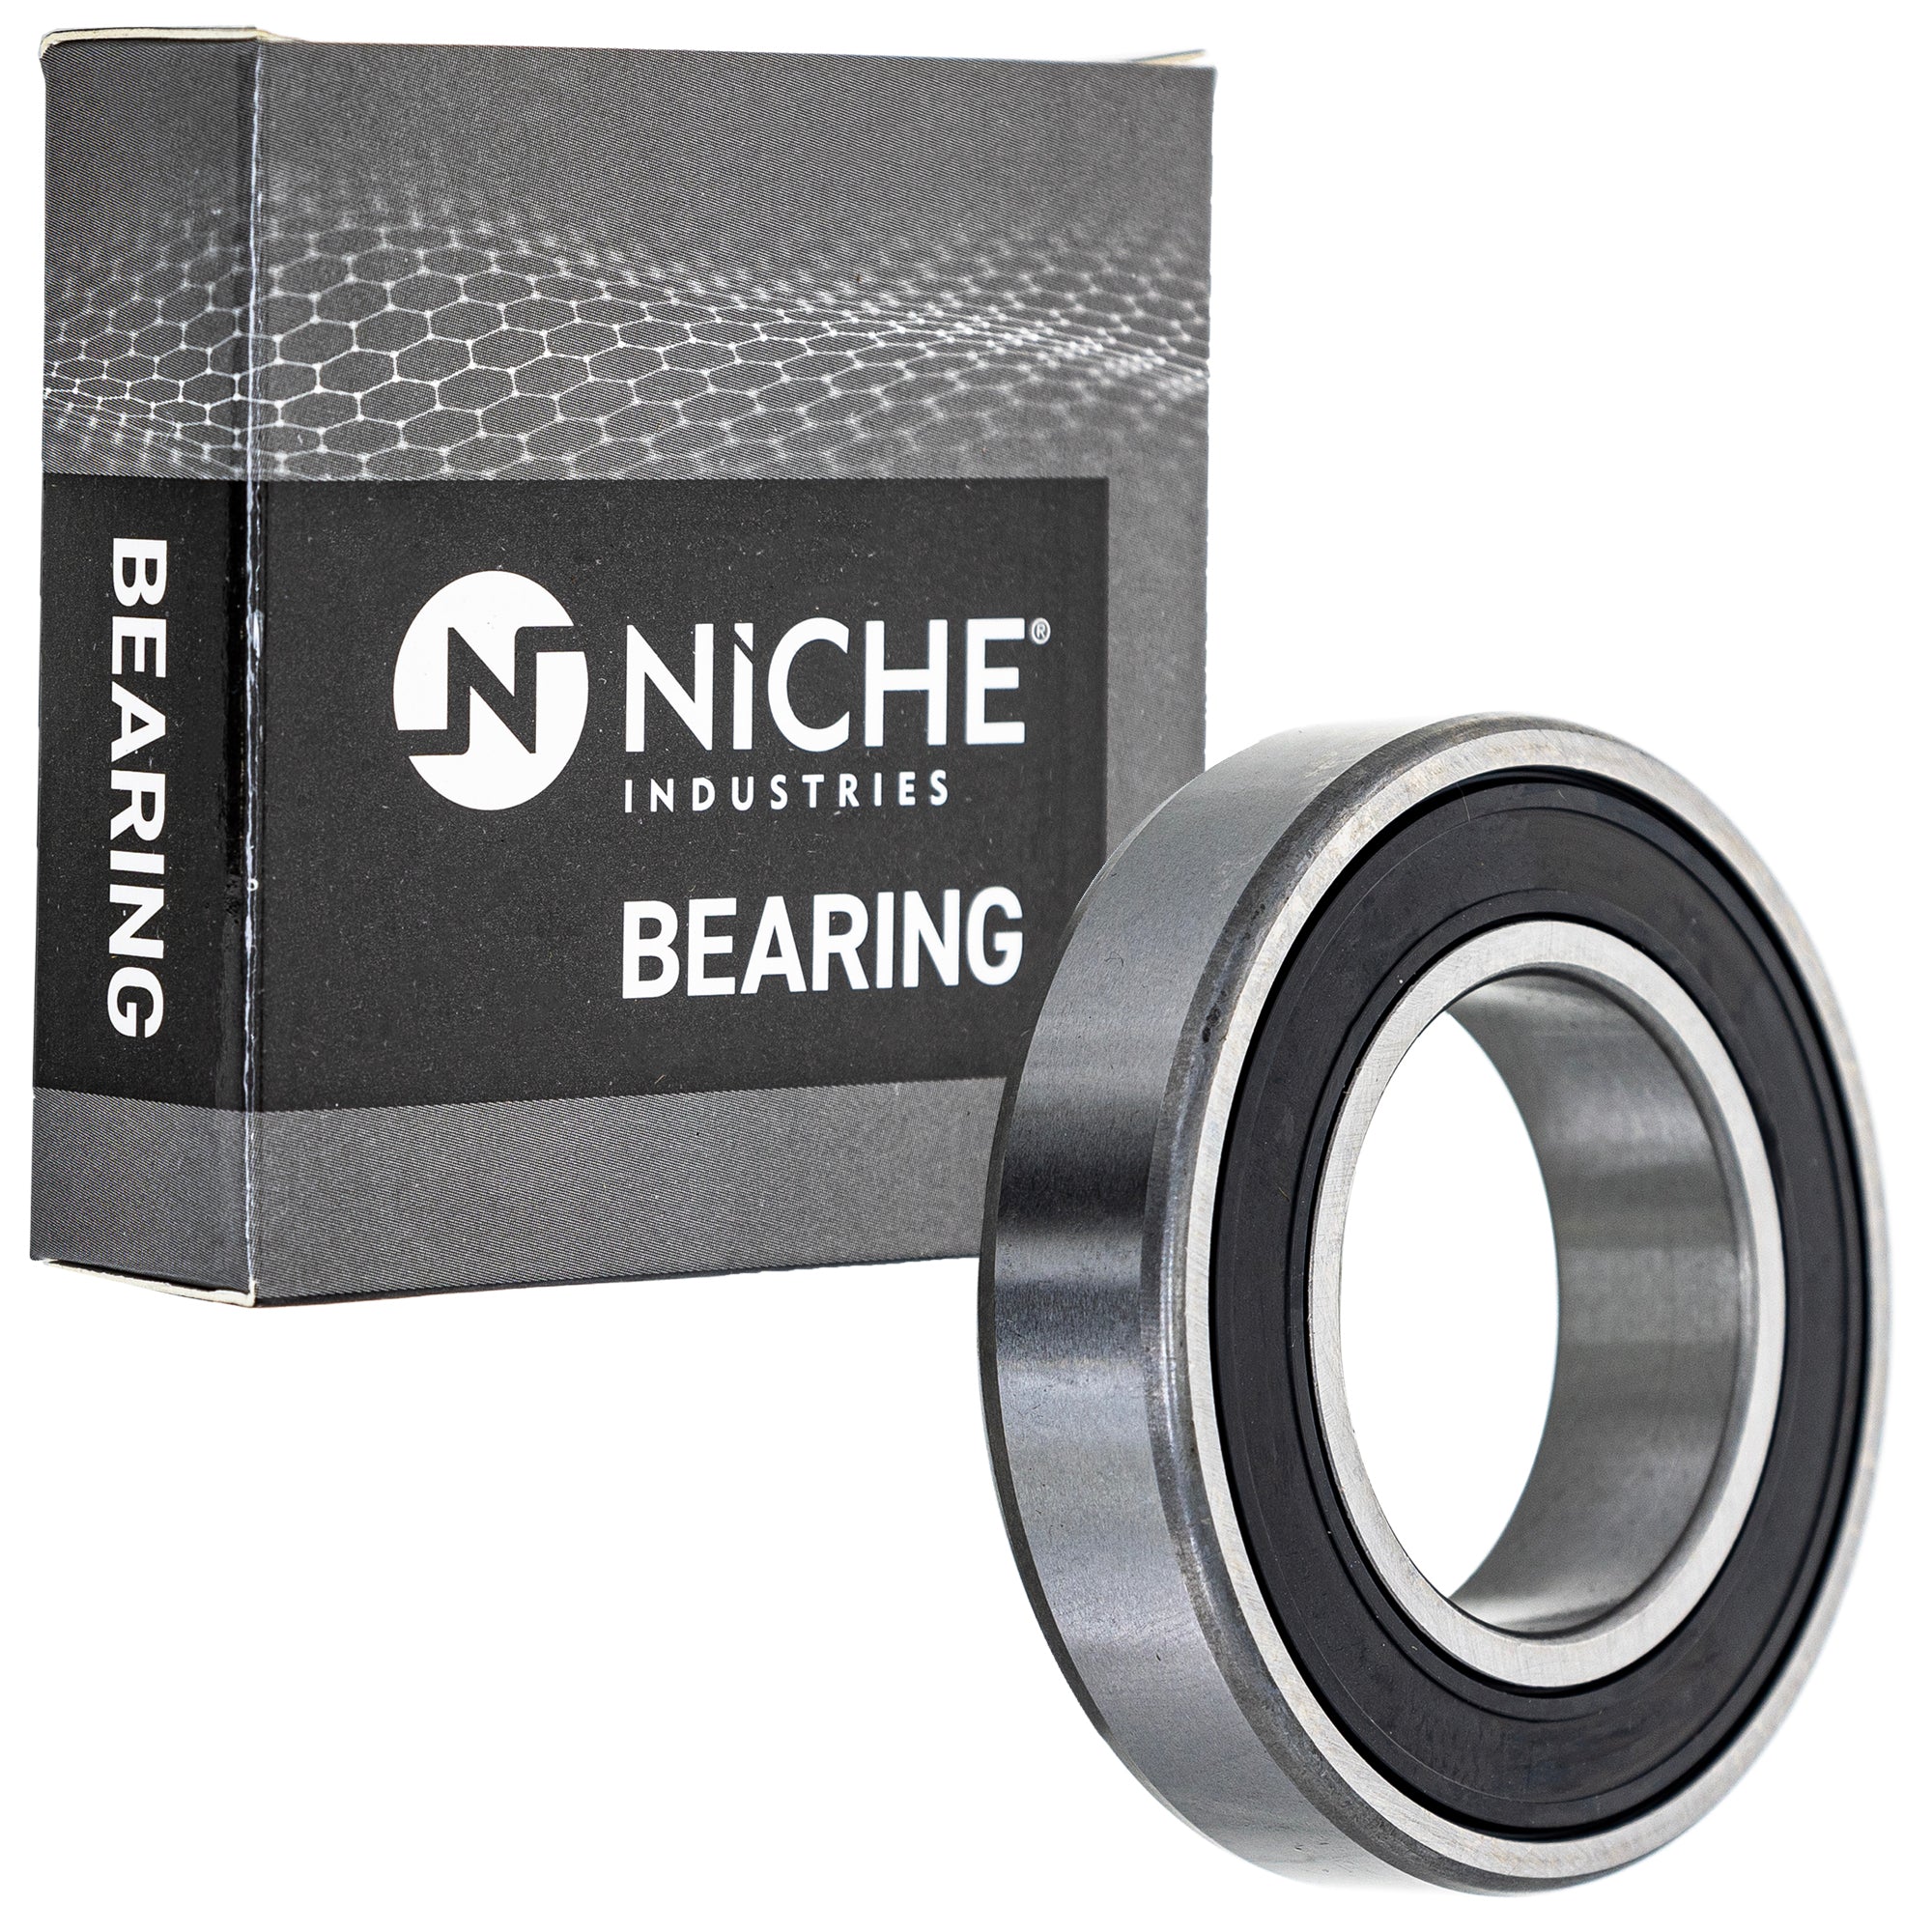 NICHE 519-CBB2336R Bearing & Seal Kit 10-Pack for zOTHER TRX90X